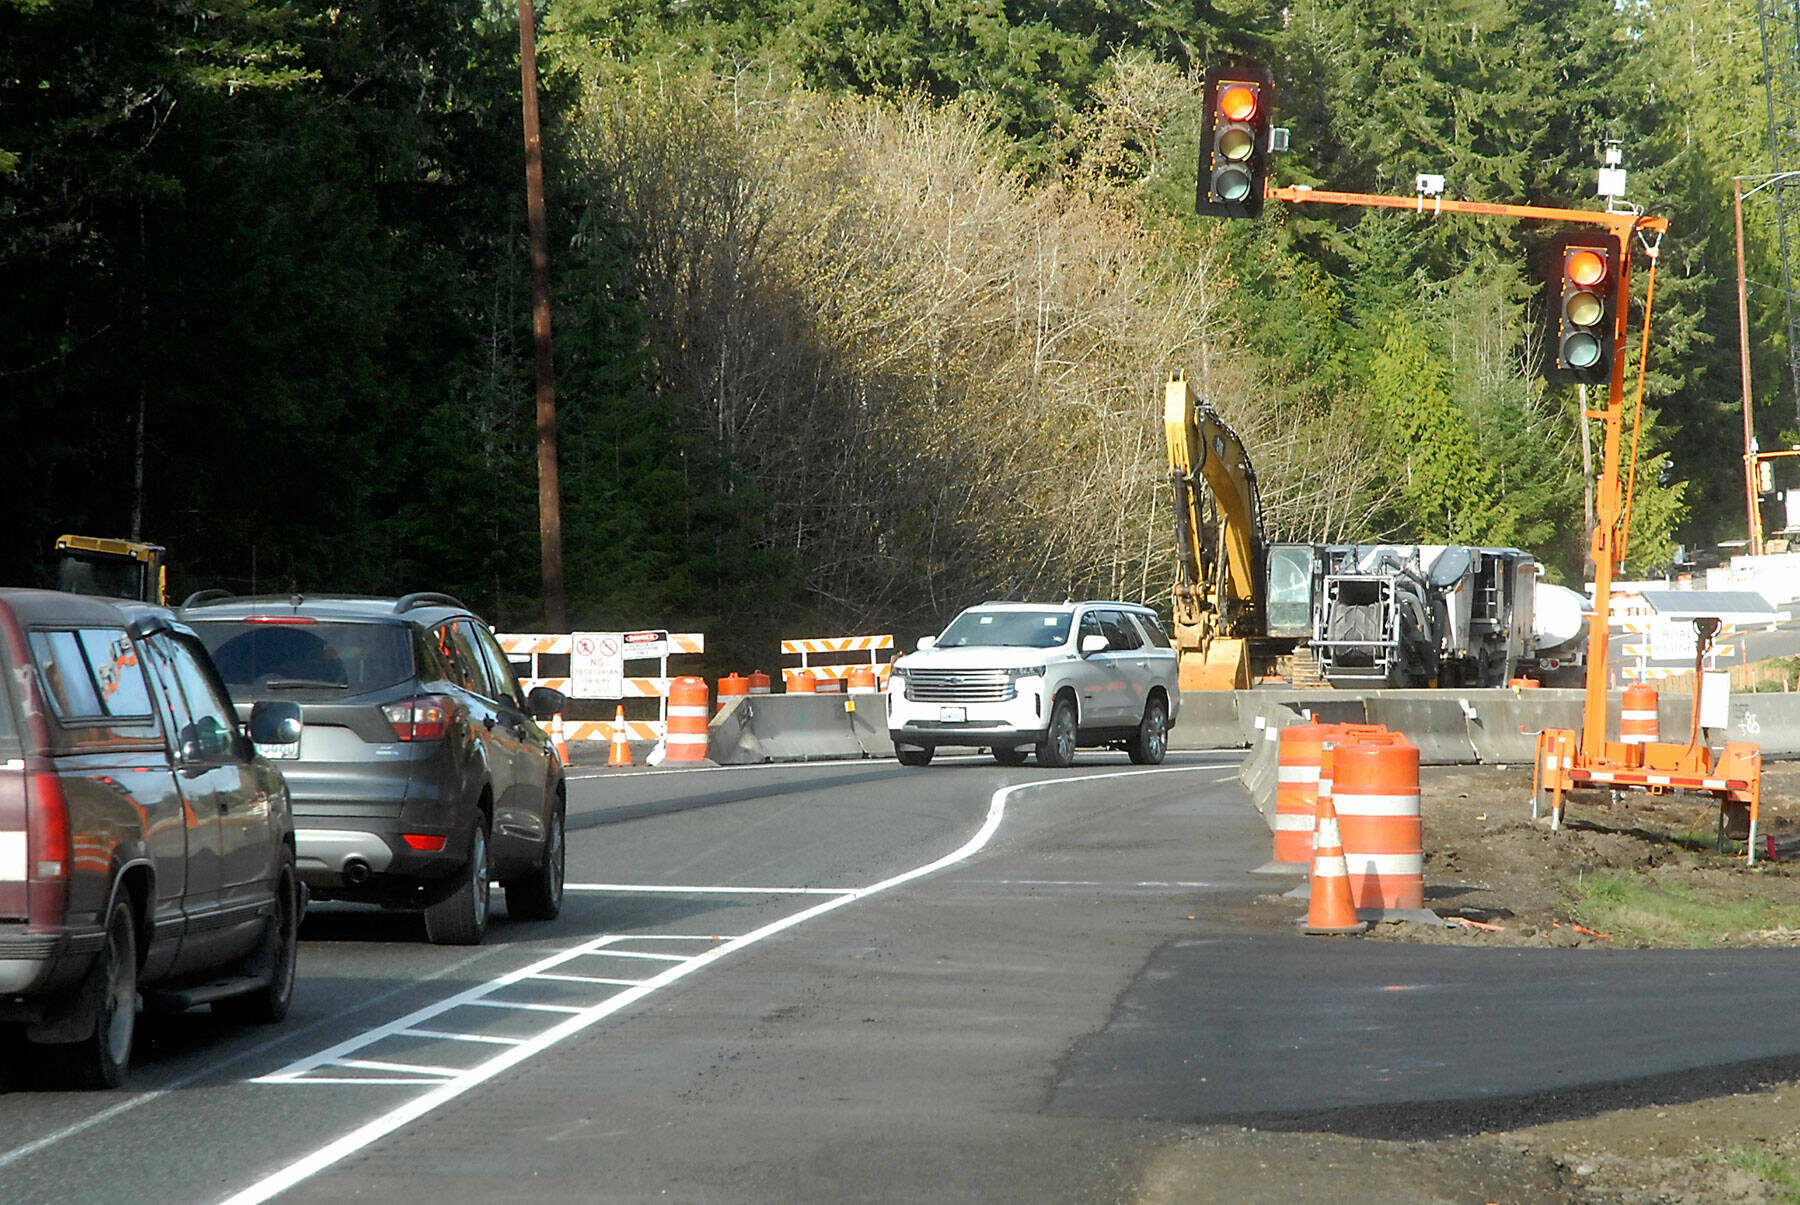 Traffic waits at a temporary stoplight controlling a one-lane temporary bridge that bypasses a construction zone on U.S. Highway 101 at Indian Creek west of Port Angeles on Saturday. (Keith Thorpe/Peninsula Daily News)